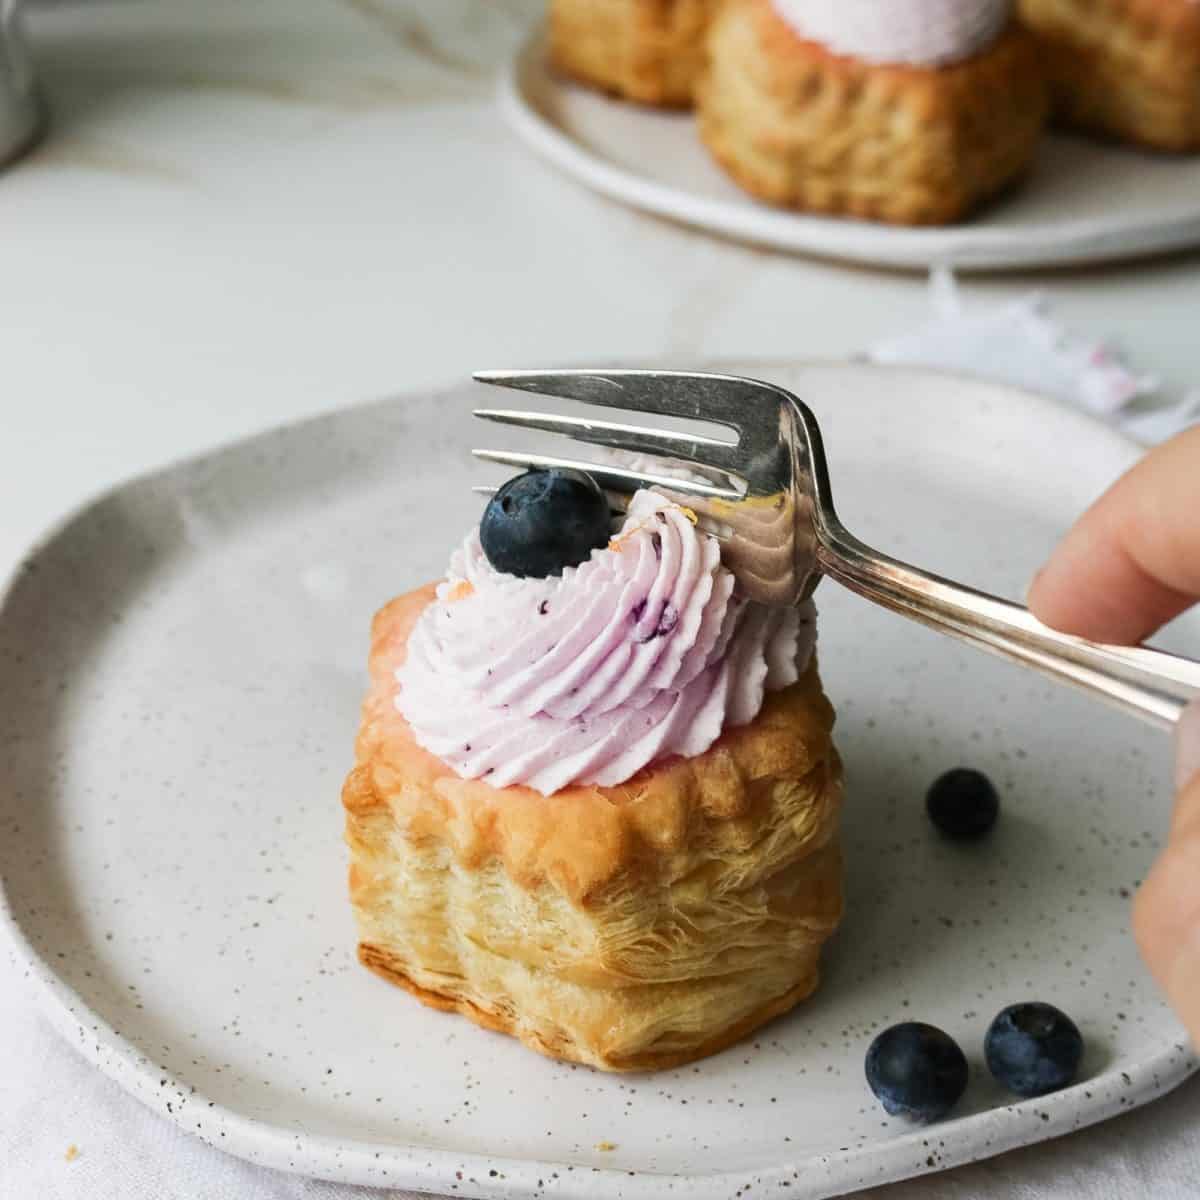 A fork cutting into a blueberry mousse puffy pastry.